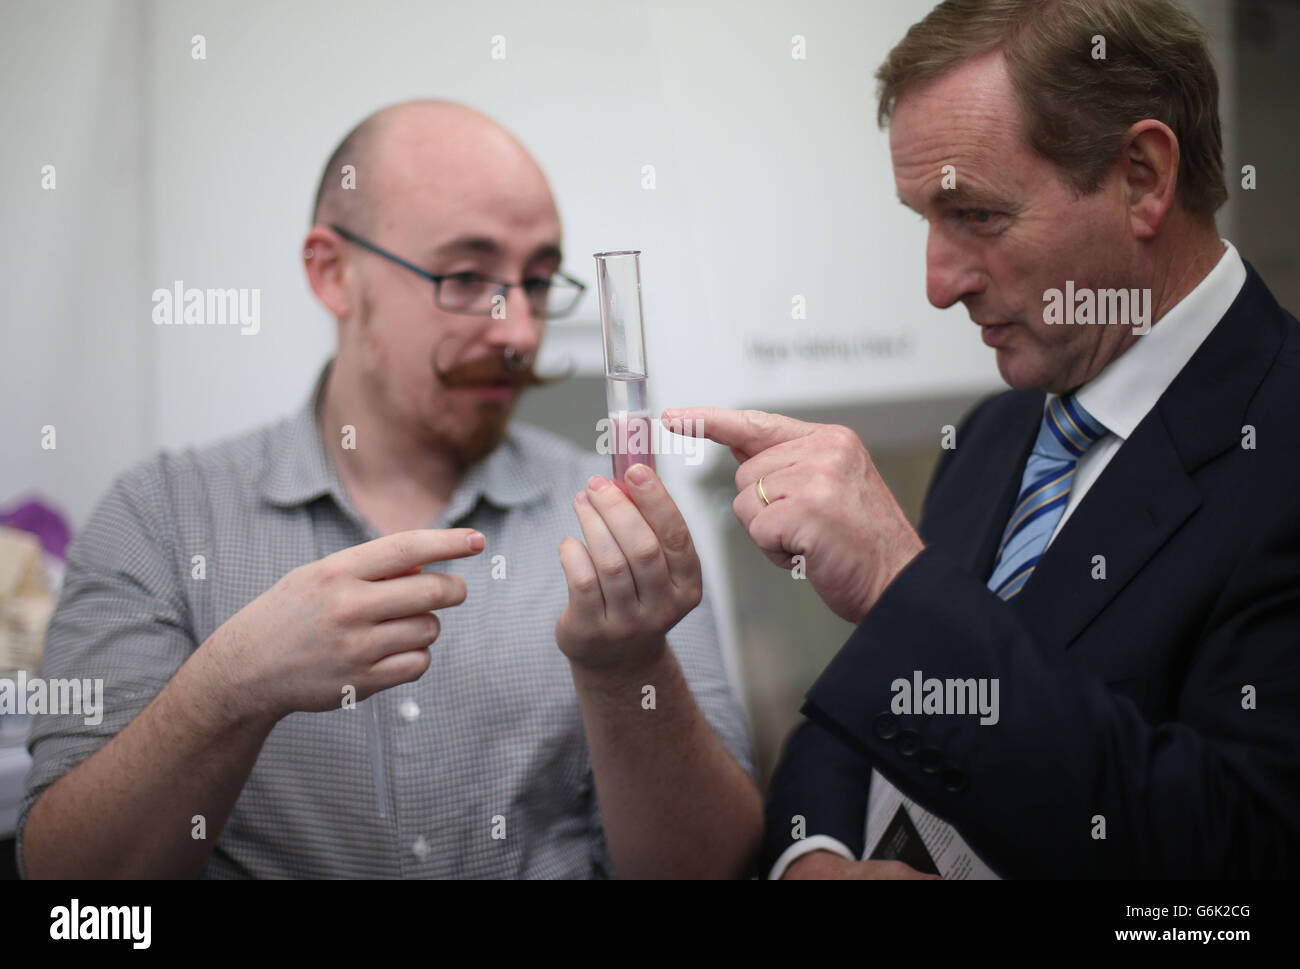 Taoiseach Enda Kenny looks on as Scientist Conor Courtney conducts a DNA extraction experiment before he launched the programme of four new exhibitions for 2014 at Science Gallery at Trinity College. Stock Photo